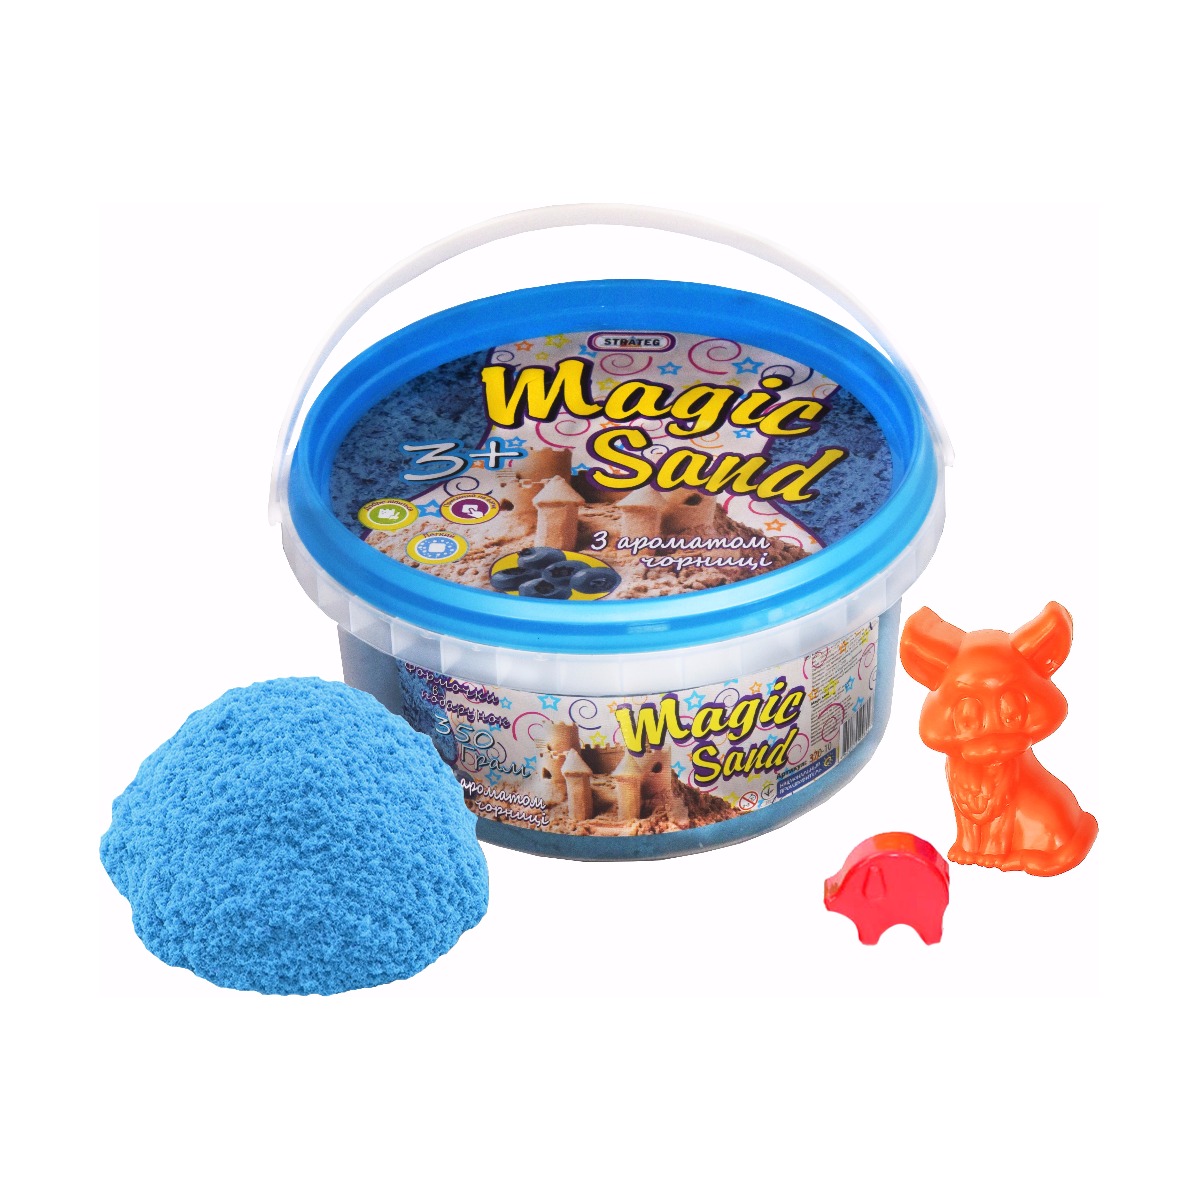 Magic sand - blue in color with blueberry flavor. Bucket 350 g (370-10)